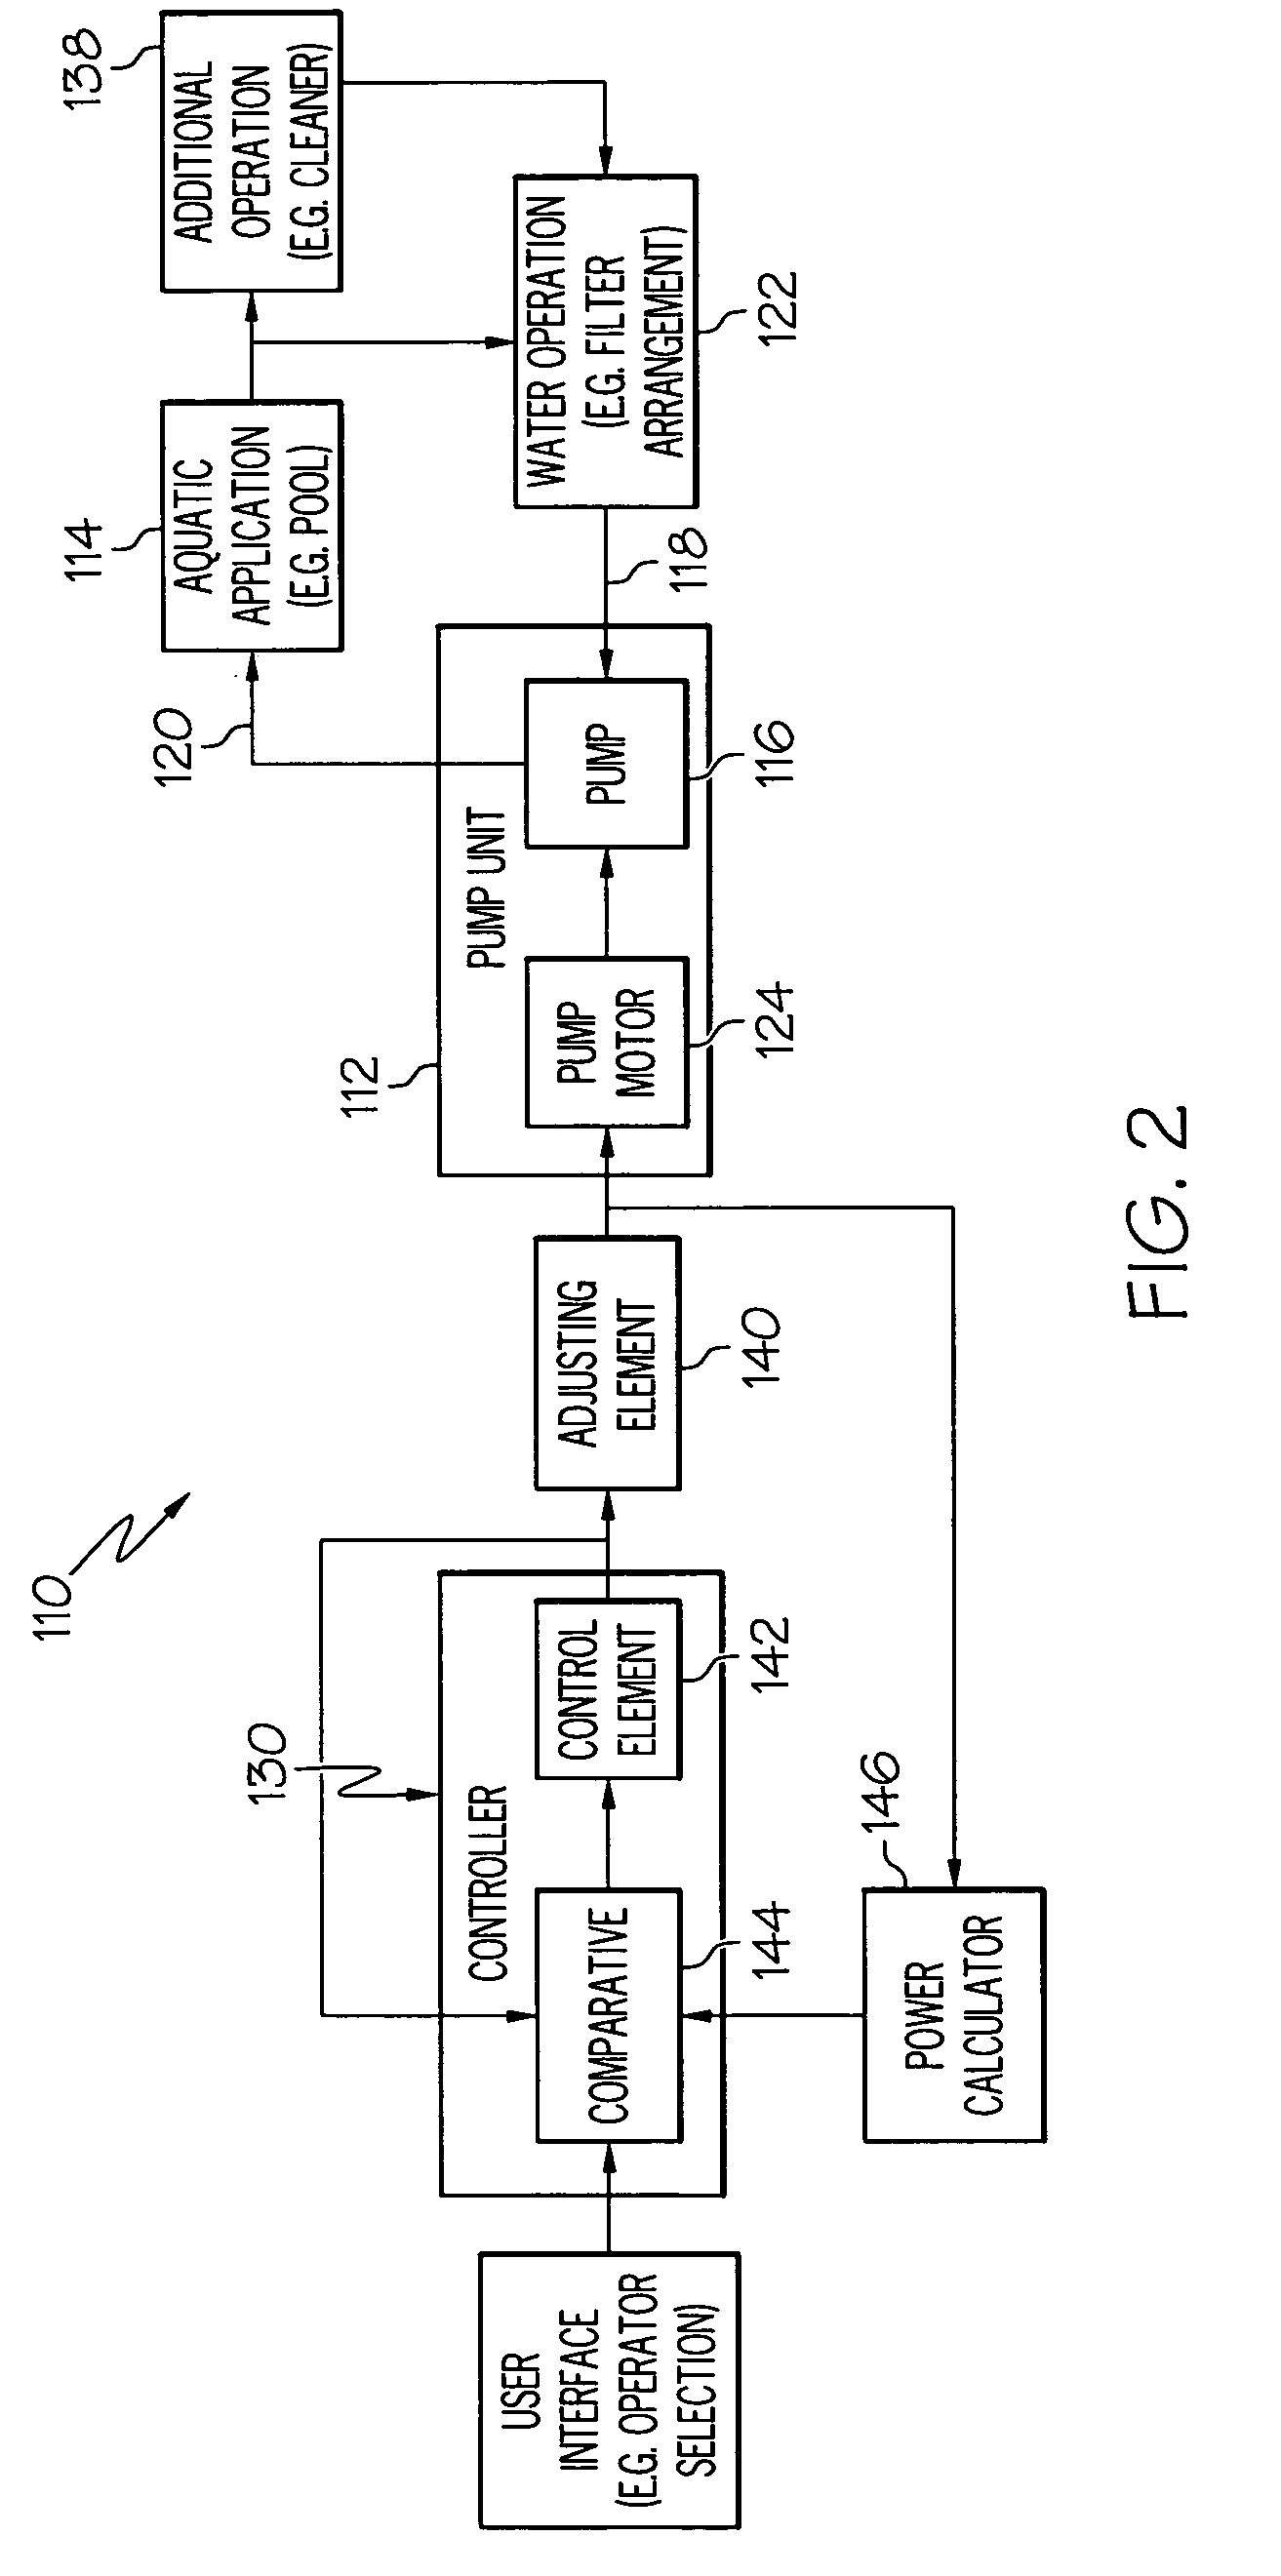 Control algorithm of variable speed pumping system